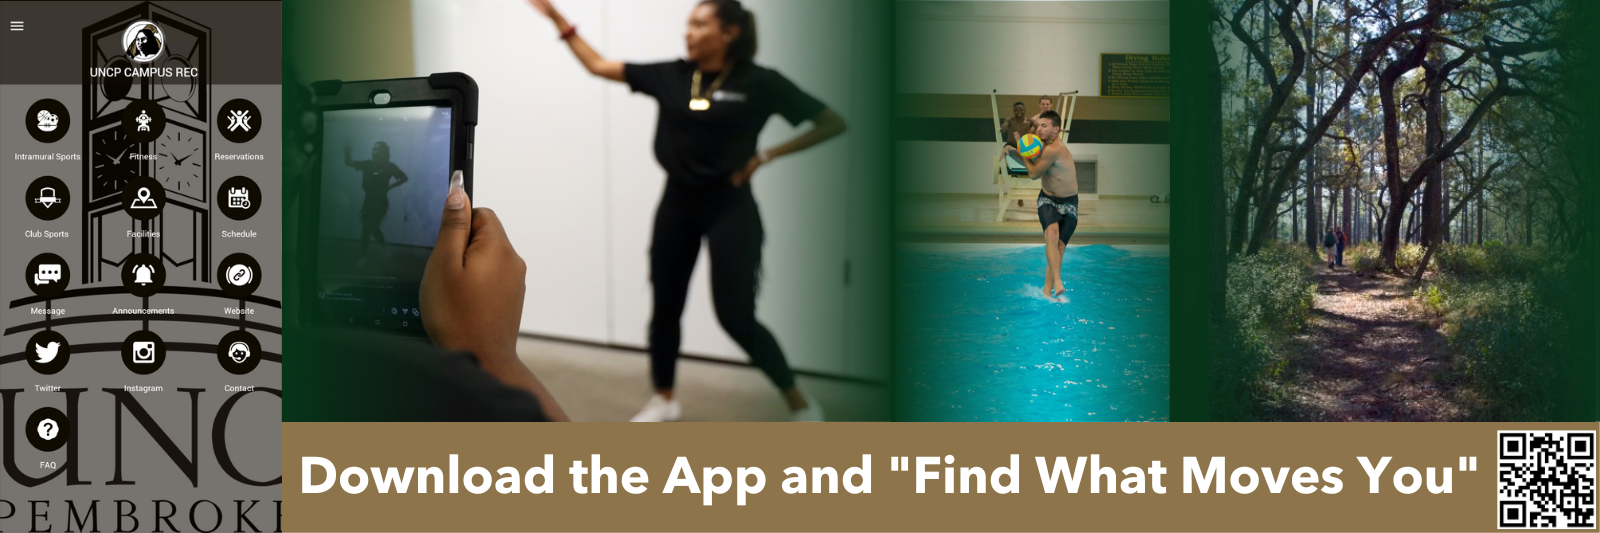 Student dancing, student at pool, forest with a trial, and Campus Rec App